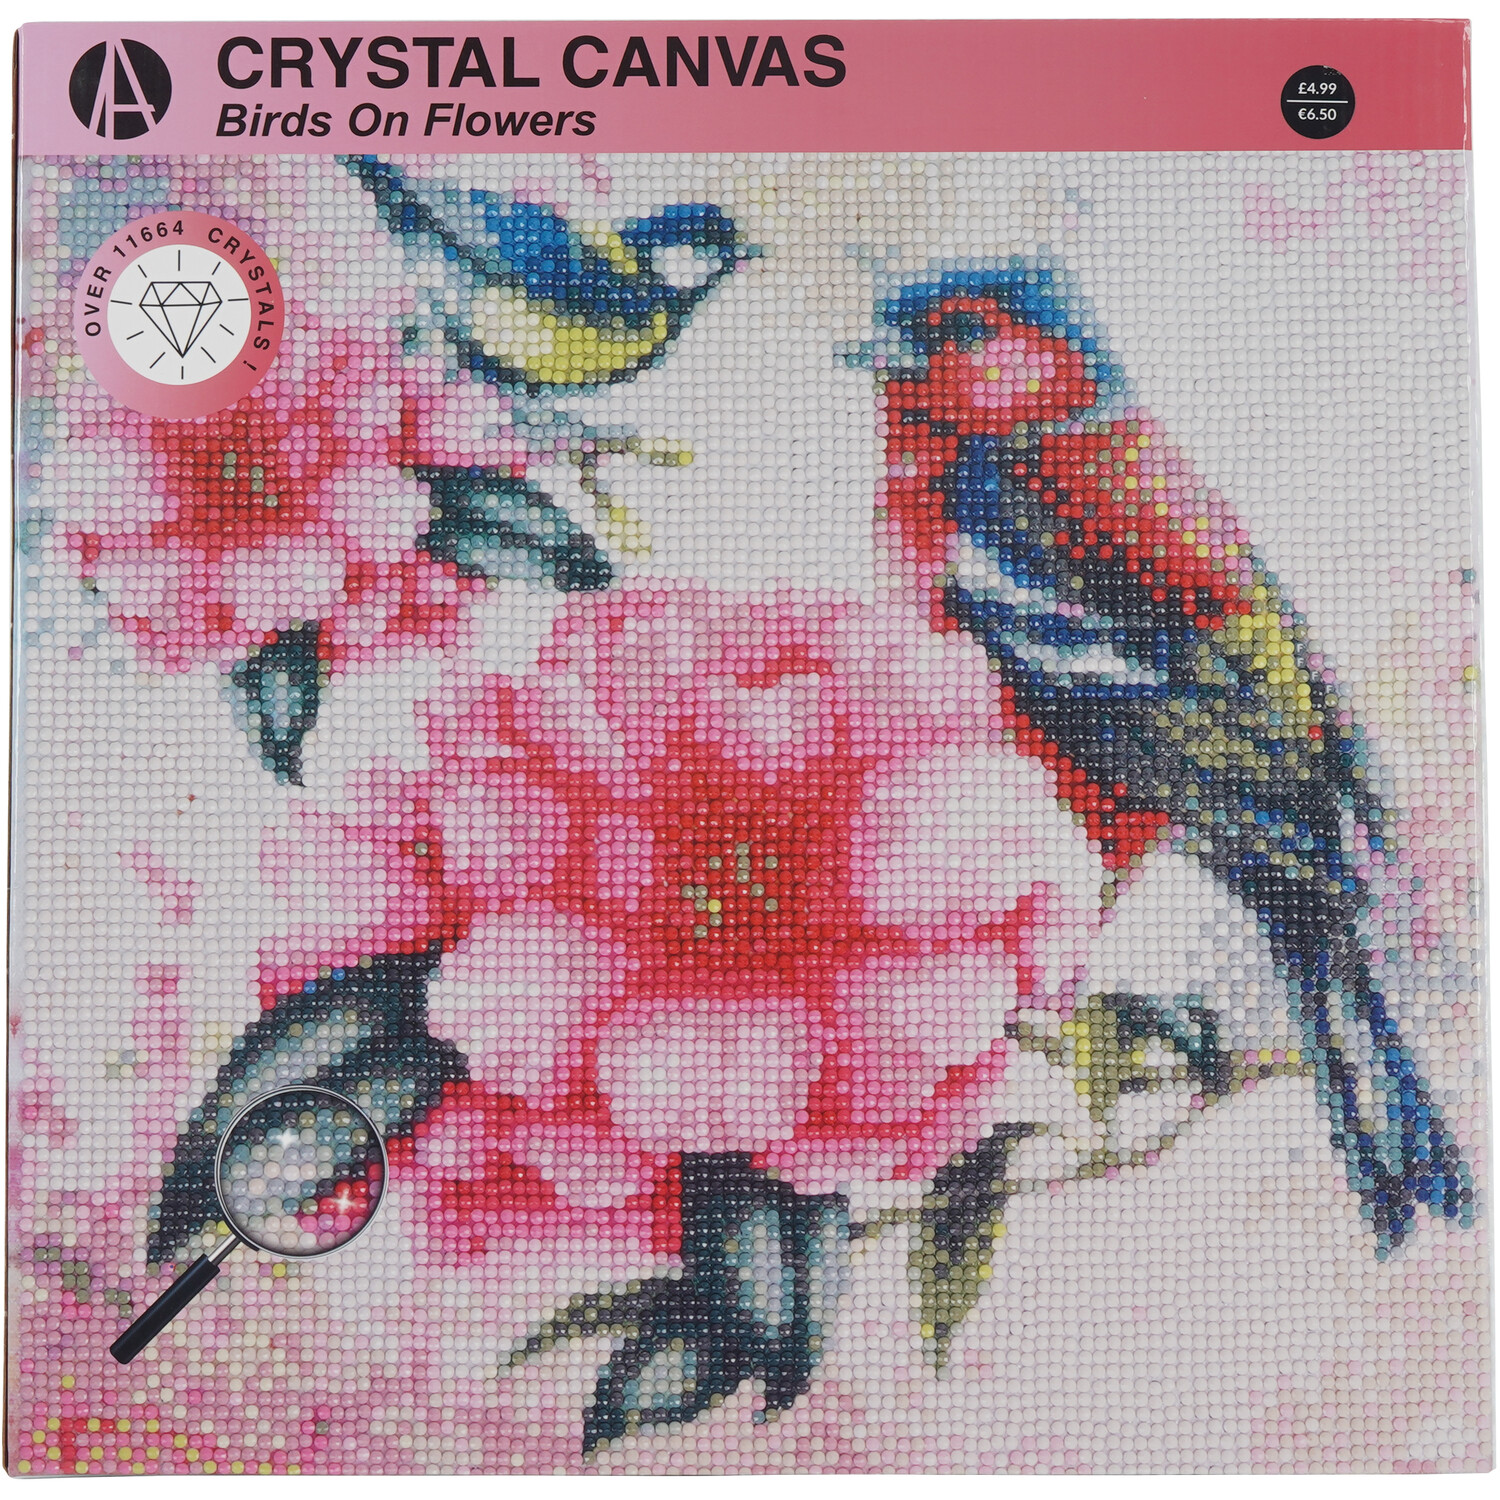 Crystal Canvas Peacock or Birds on Flowers Image 1